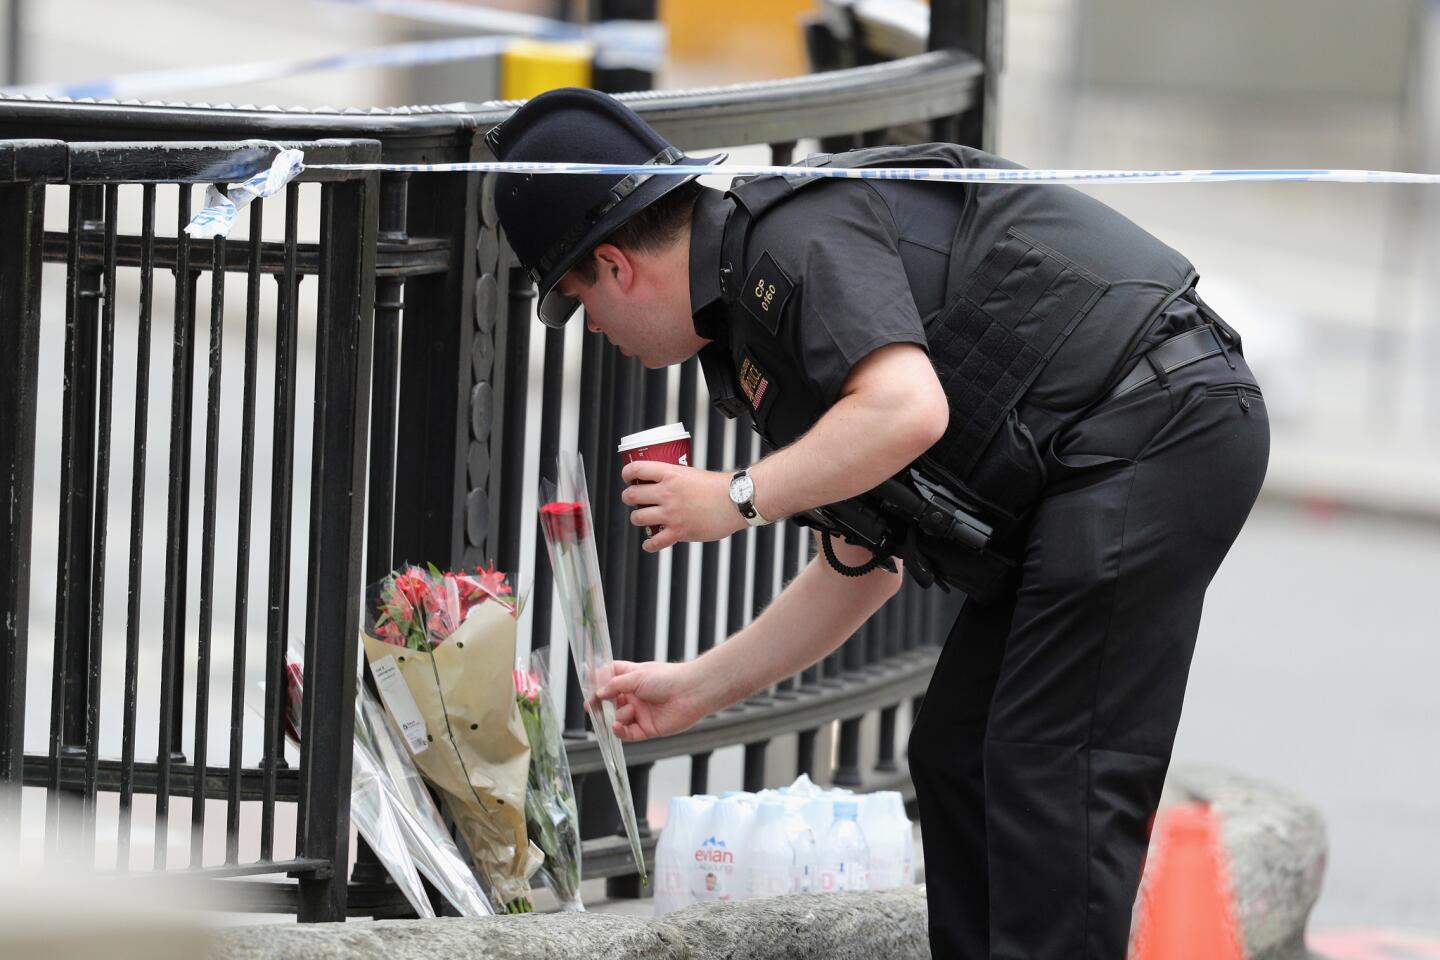 A police officer places a rose at the scene of last night's terrorist attack on London Bridge on June 4, 2017 in London, England.